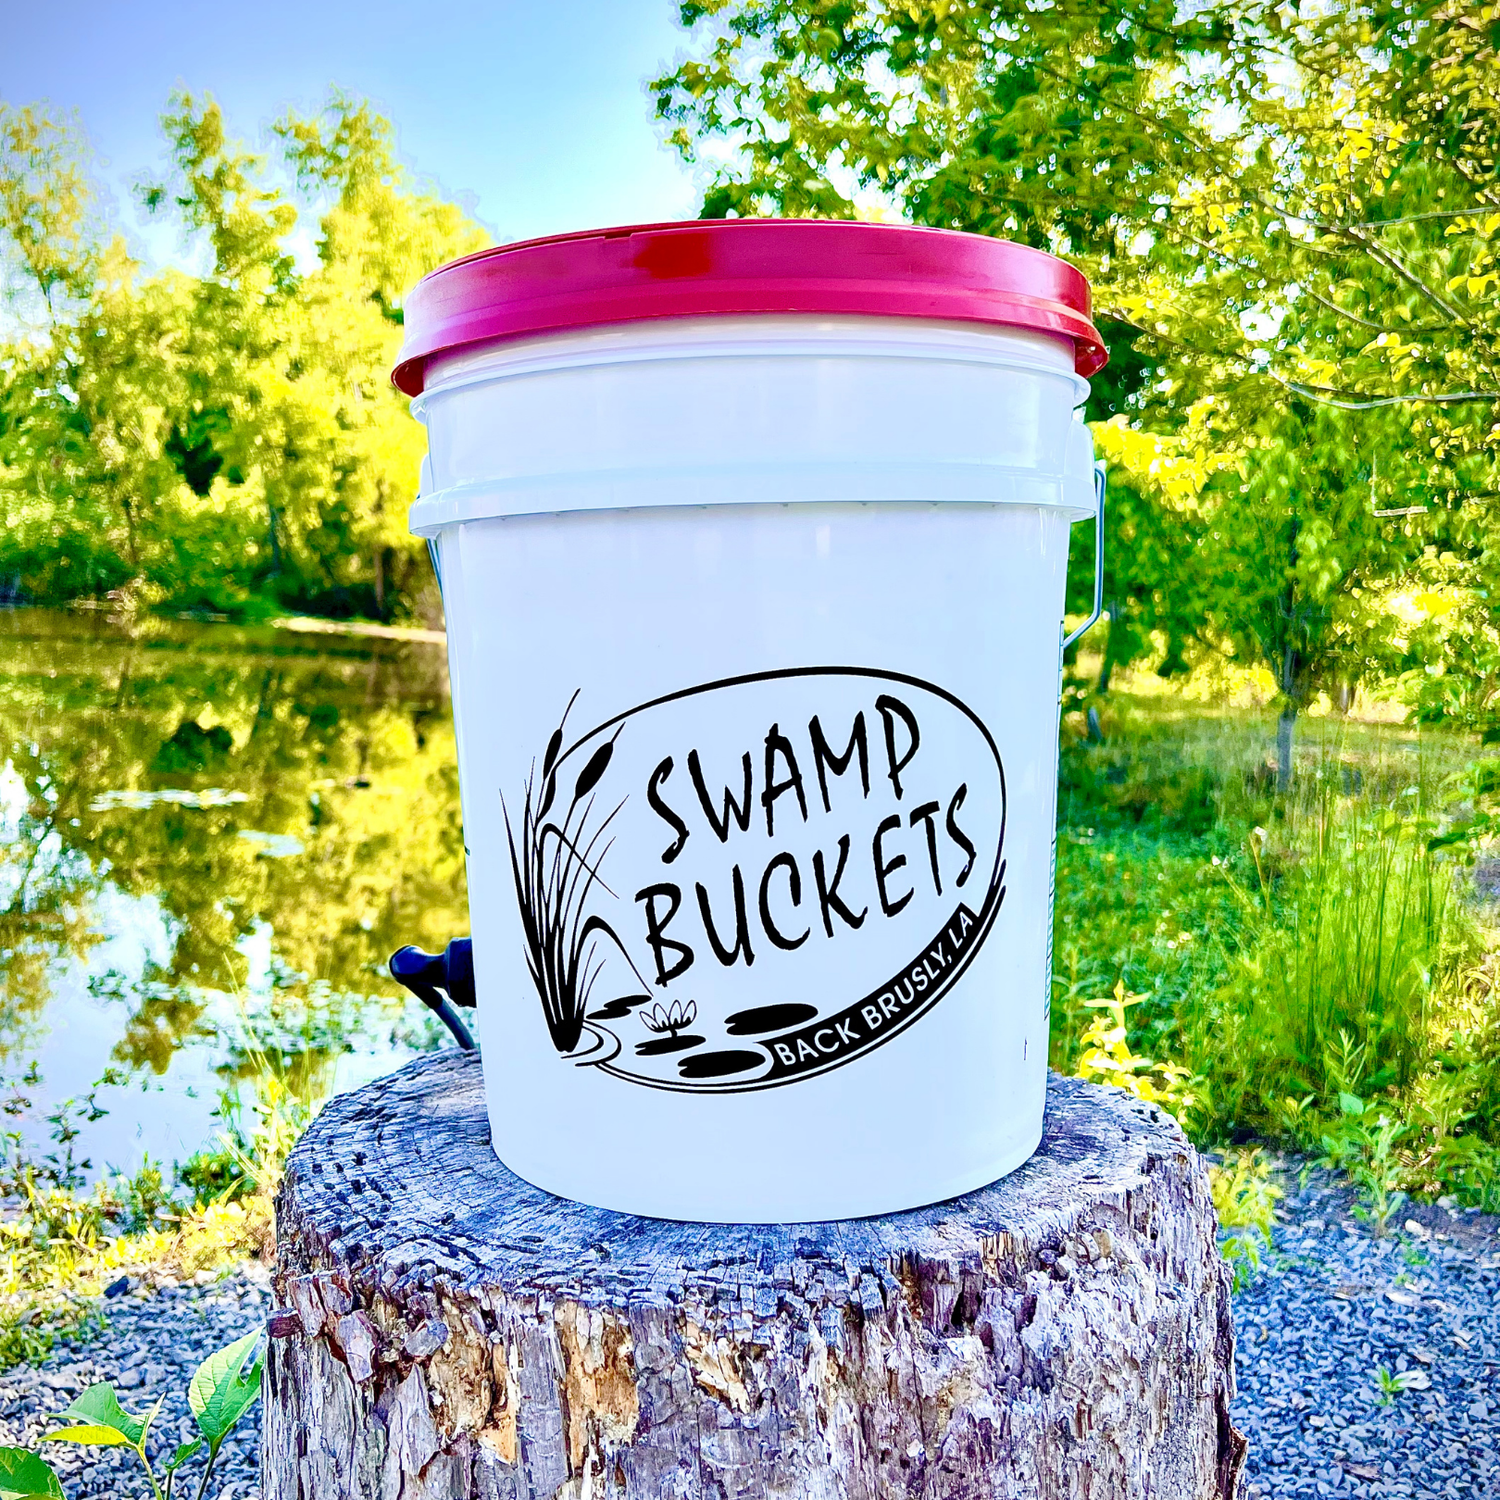 swamp bucket bout to go down : r/cajunfood